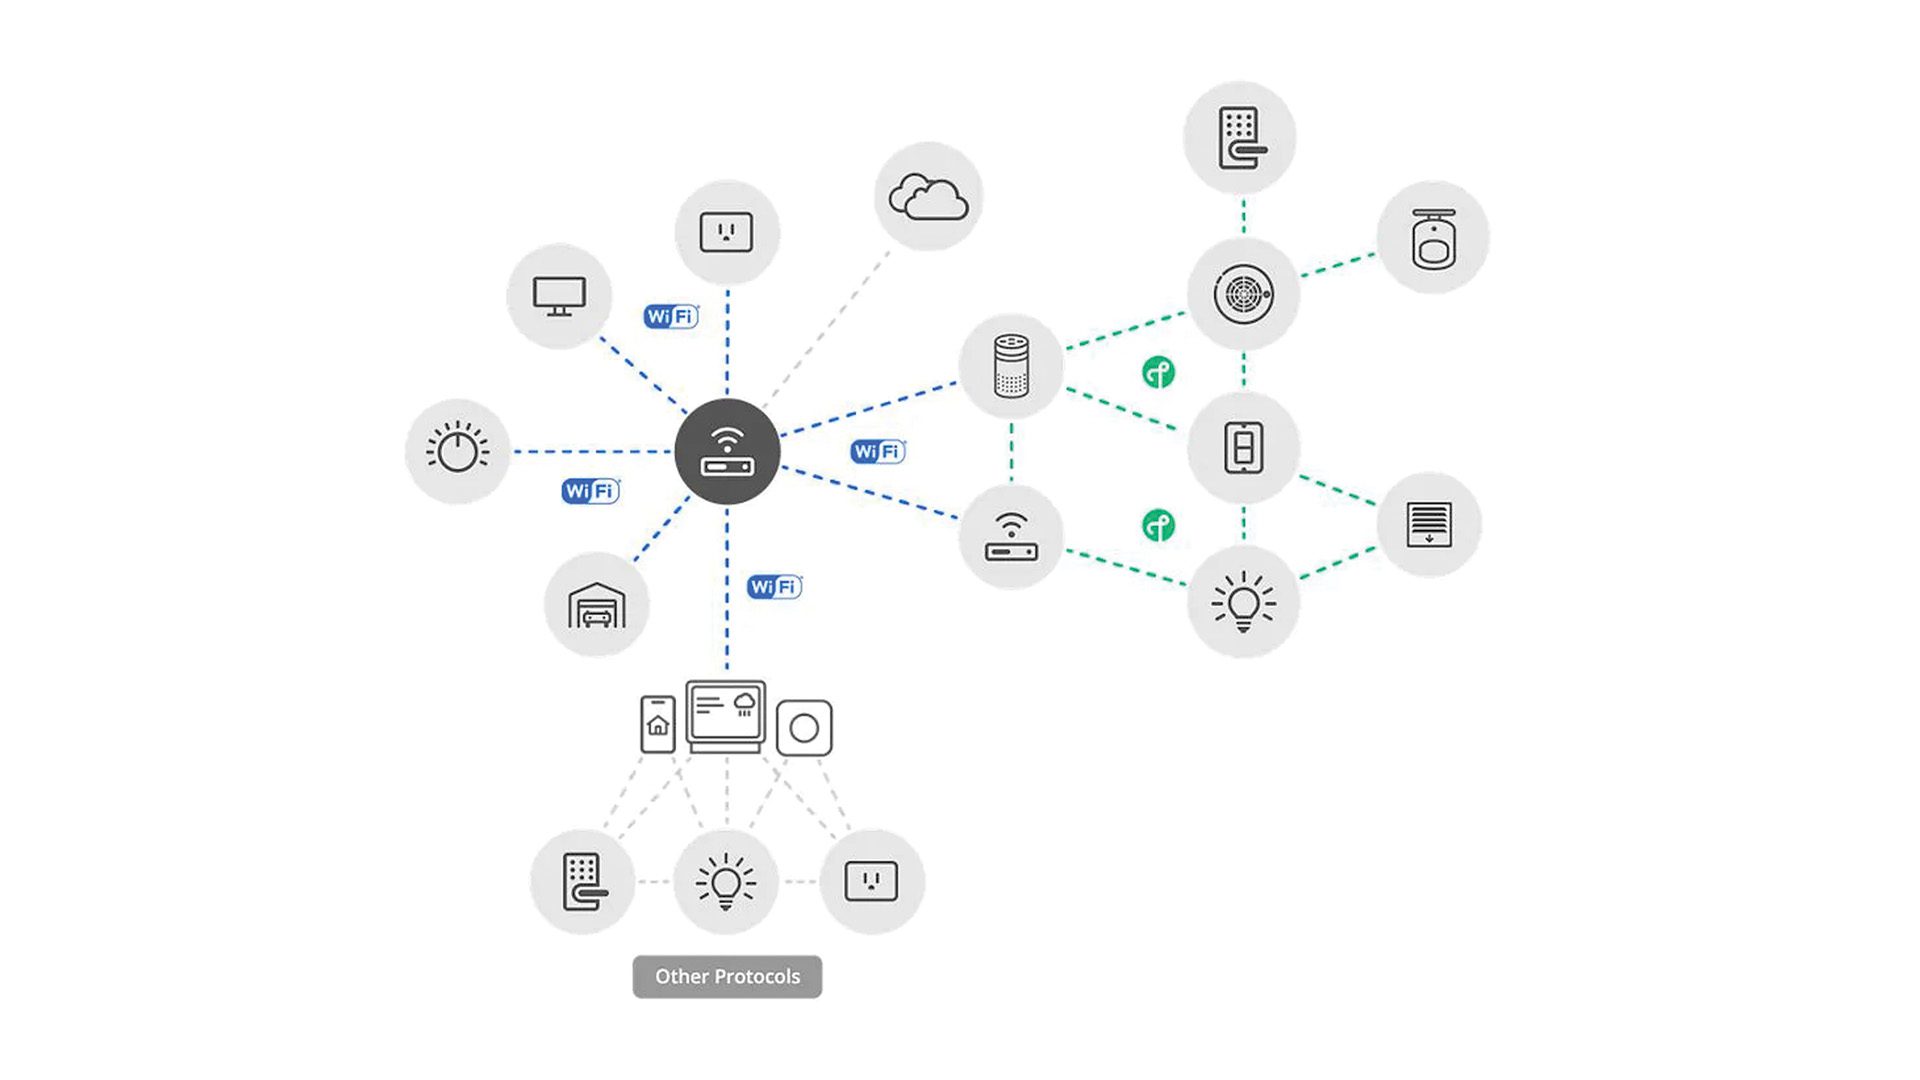 Matter network map shows how devices will connect to each other, the internet, and other protocols using Wi-Fi, Thread, and Matter controllers. 